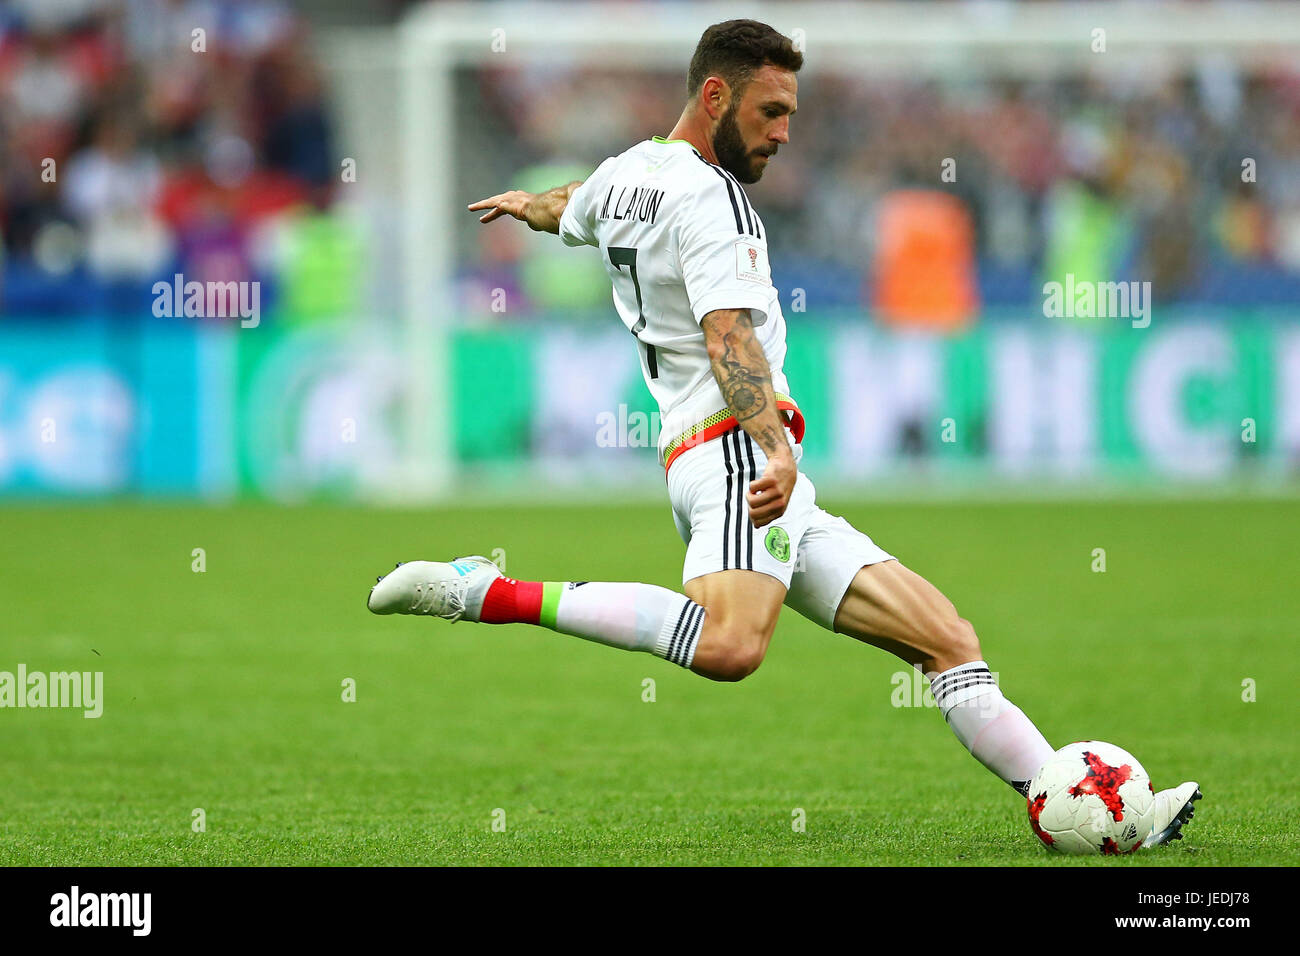 Kazan, Russia. 24th June, 2017. Miguel Layun of Mexico during Mexico-Russia match valid for the third round of the 2017 Confederations Cup, this Saturday (24), held at the Kazan Arena in Kazan, Russia. (Photo: Heuler Andrey/DiaEsportivo/Fotoarena) Credit: Foto Arena LTDA/Alamy Live News Stock Photo